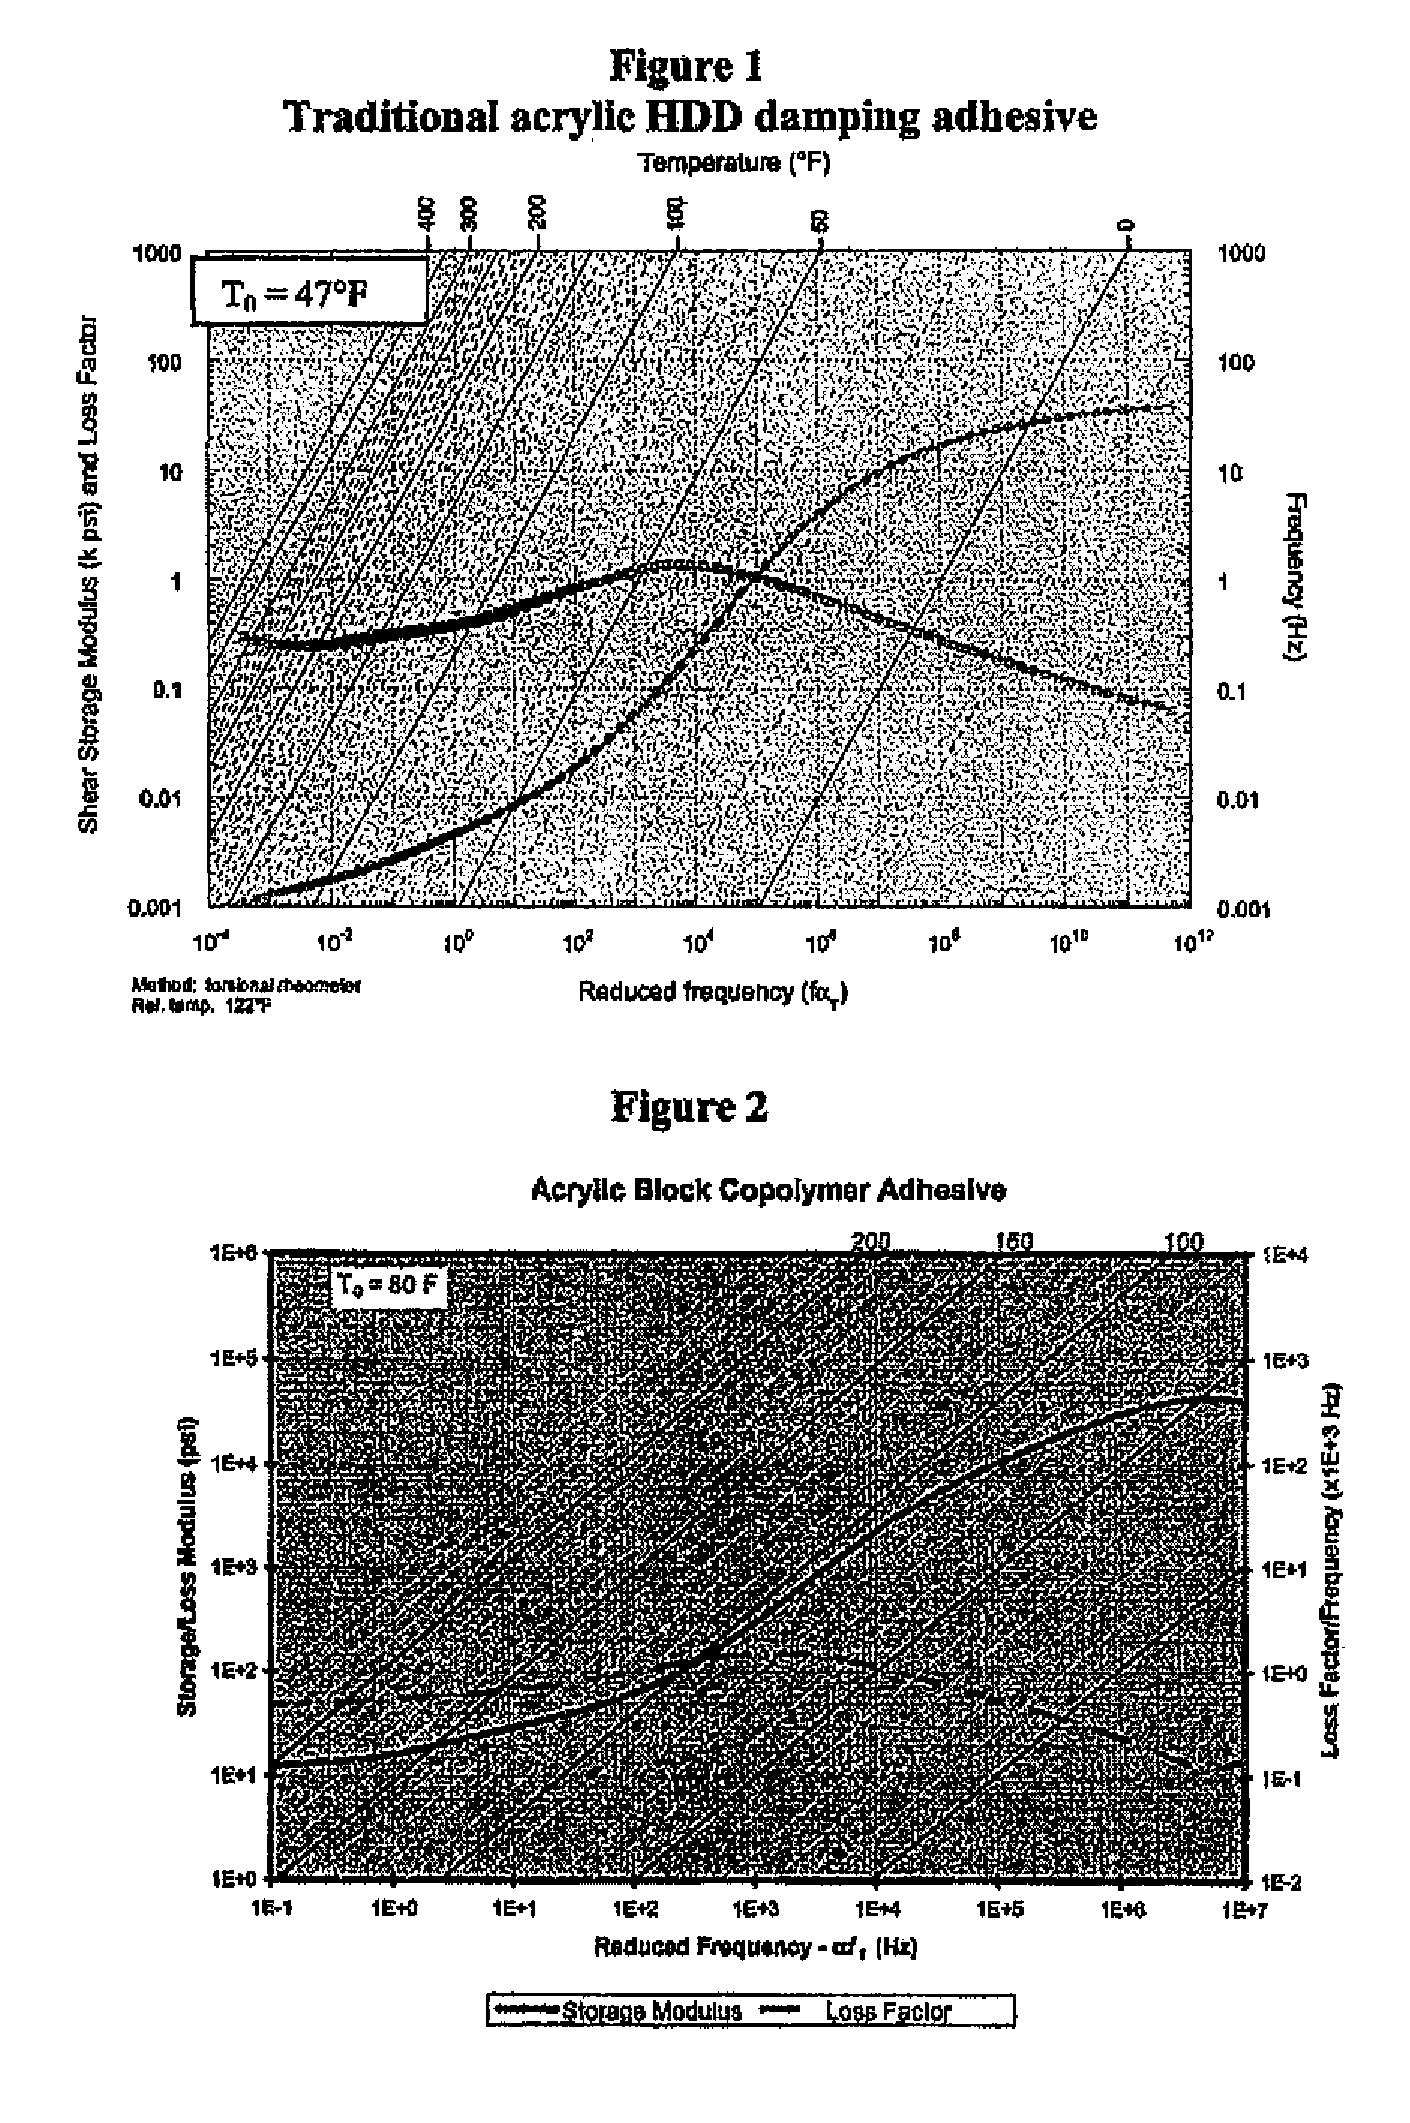 Acrylic Block Copolymers as Acoustical and Vibrational Dampening Material for Use in Electronic Devices